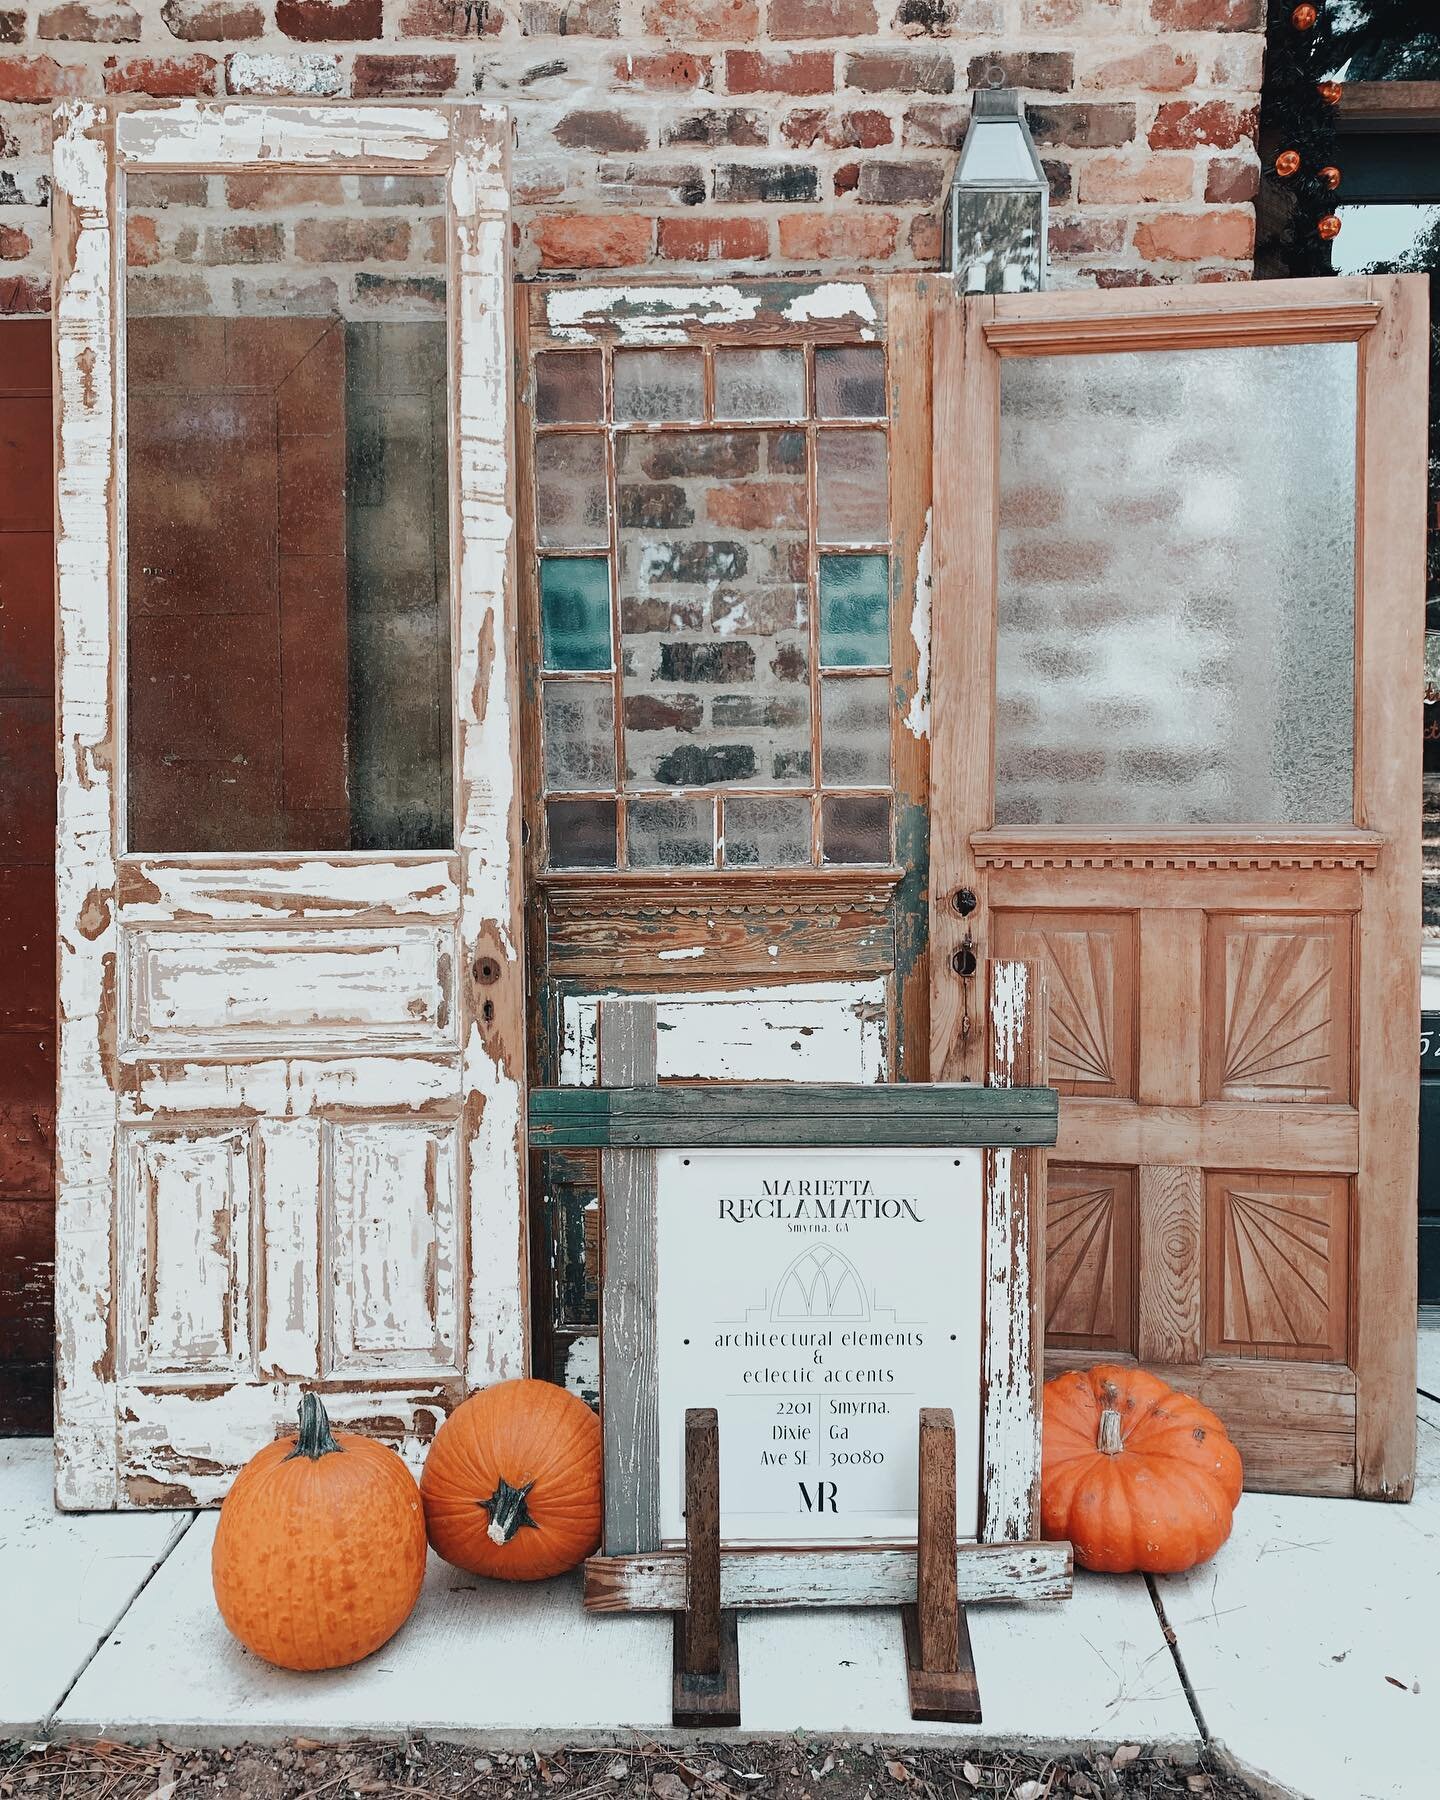 Pretty doors with glass! They look good beside pumpkins too :)